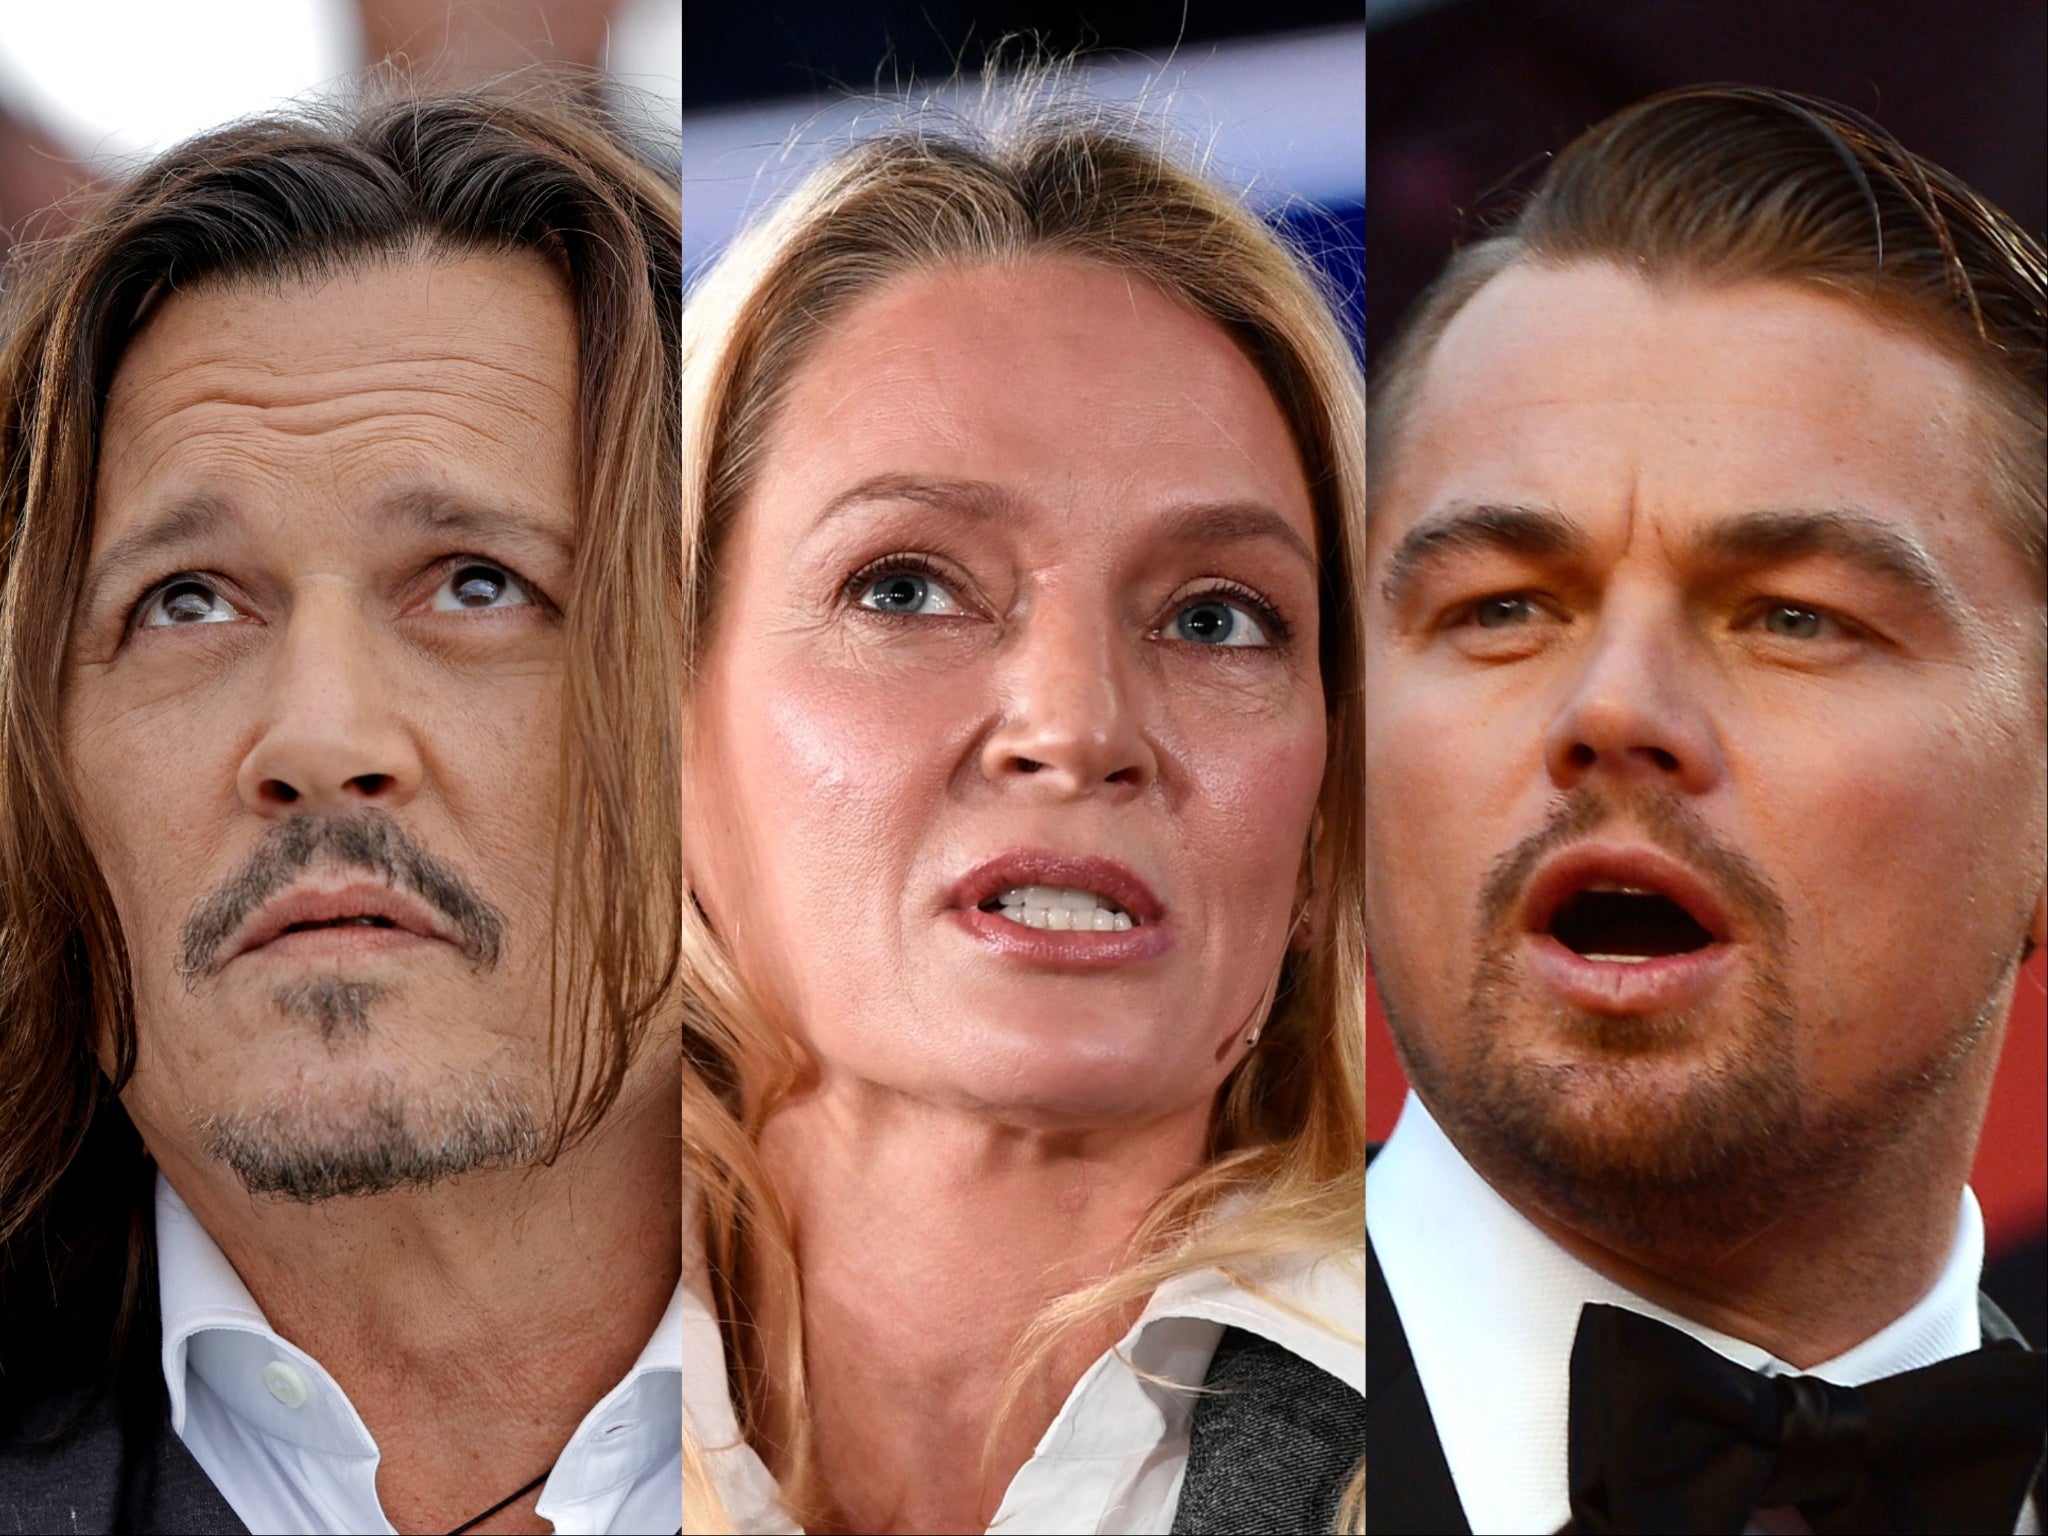 Johnny Depp, Uma Thurman and Leonardo DiCaprio are among the actors whose projects have been buried